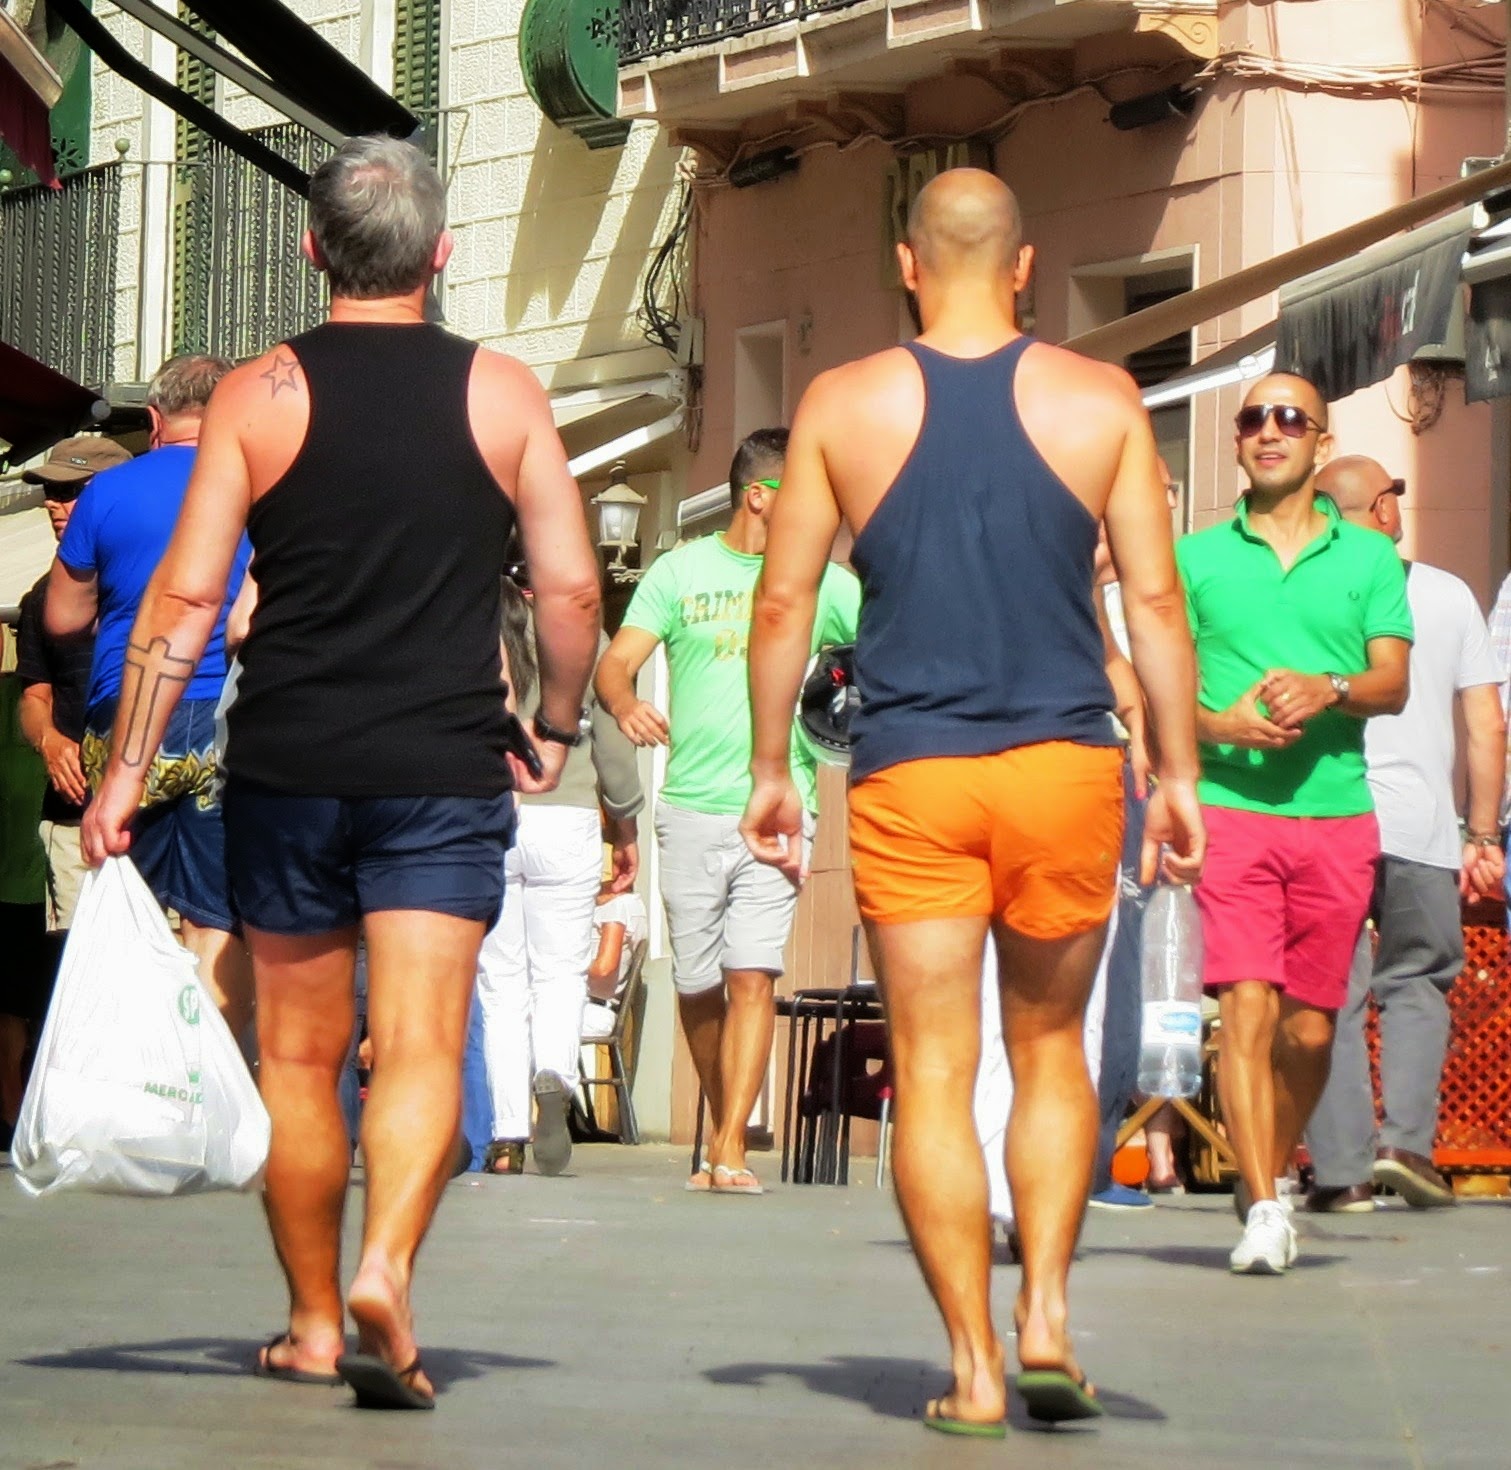 hot men from around the world: SITGES SPAIN JUNE 2014